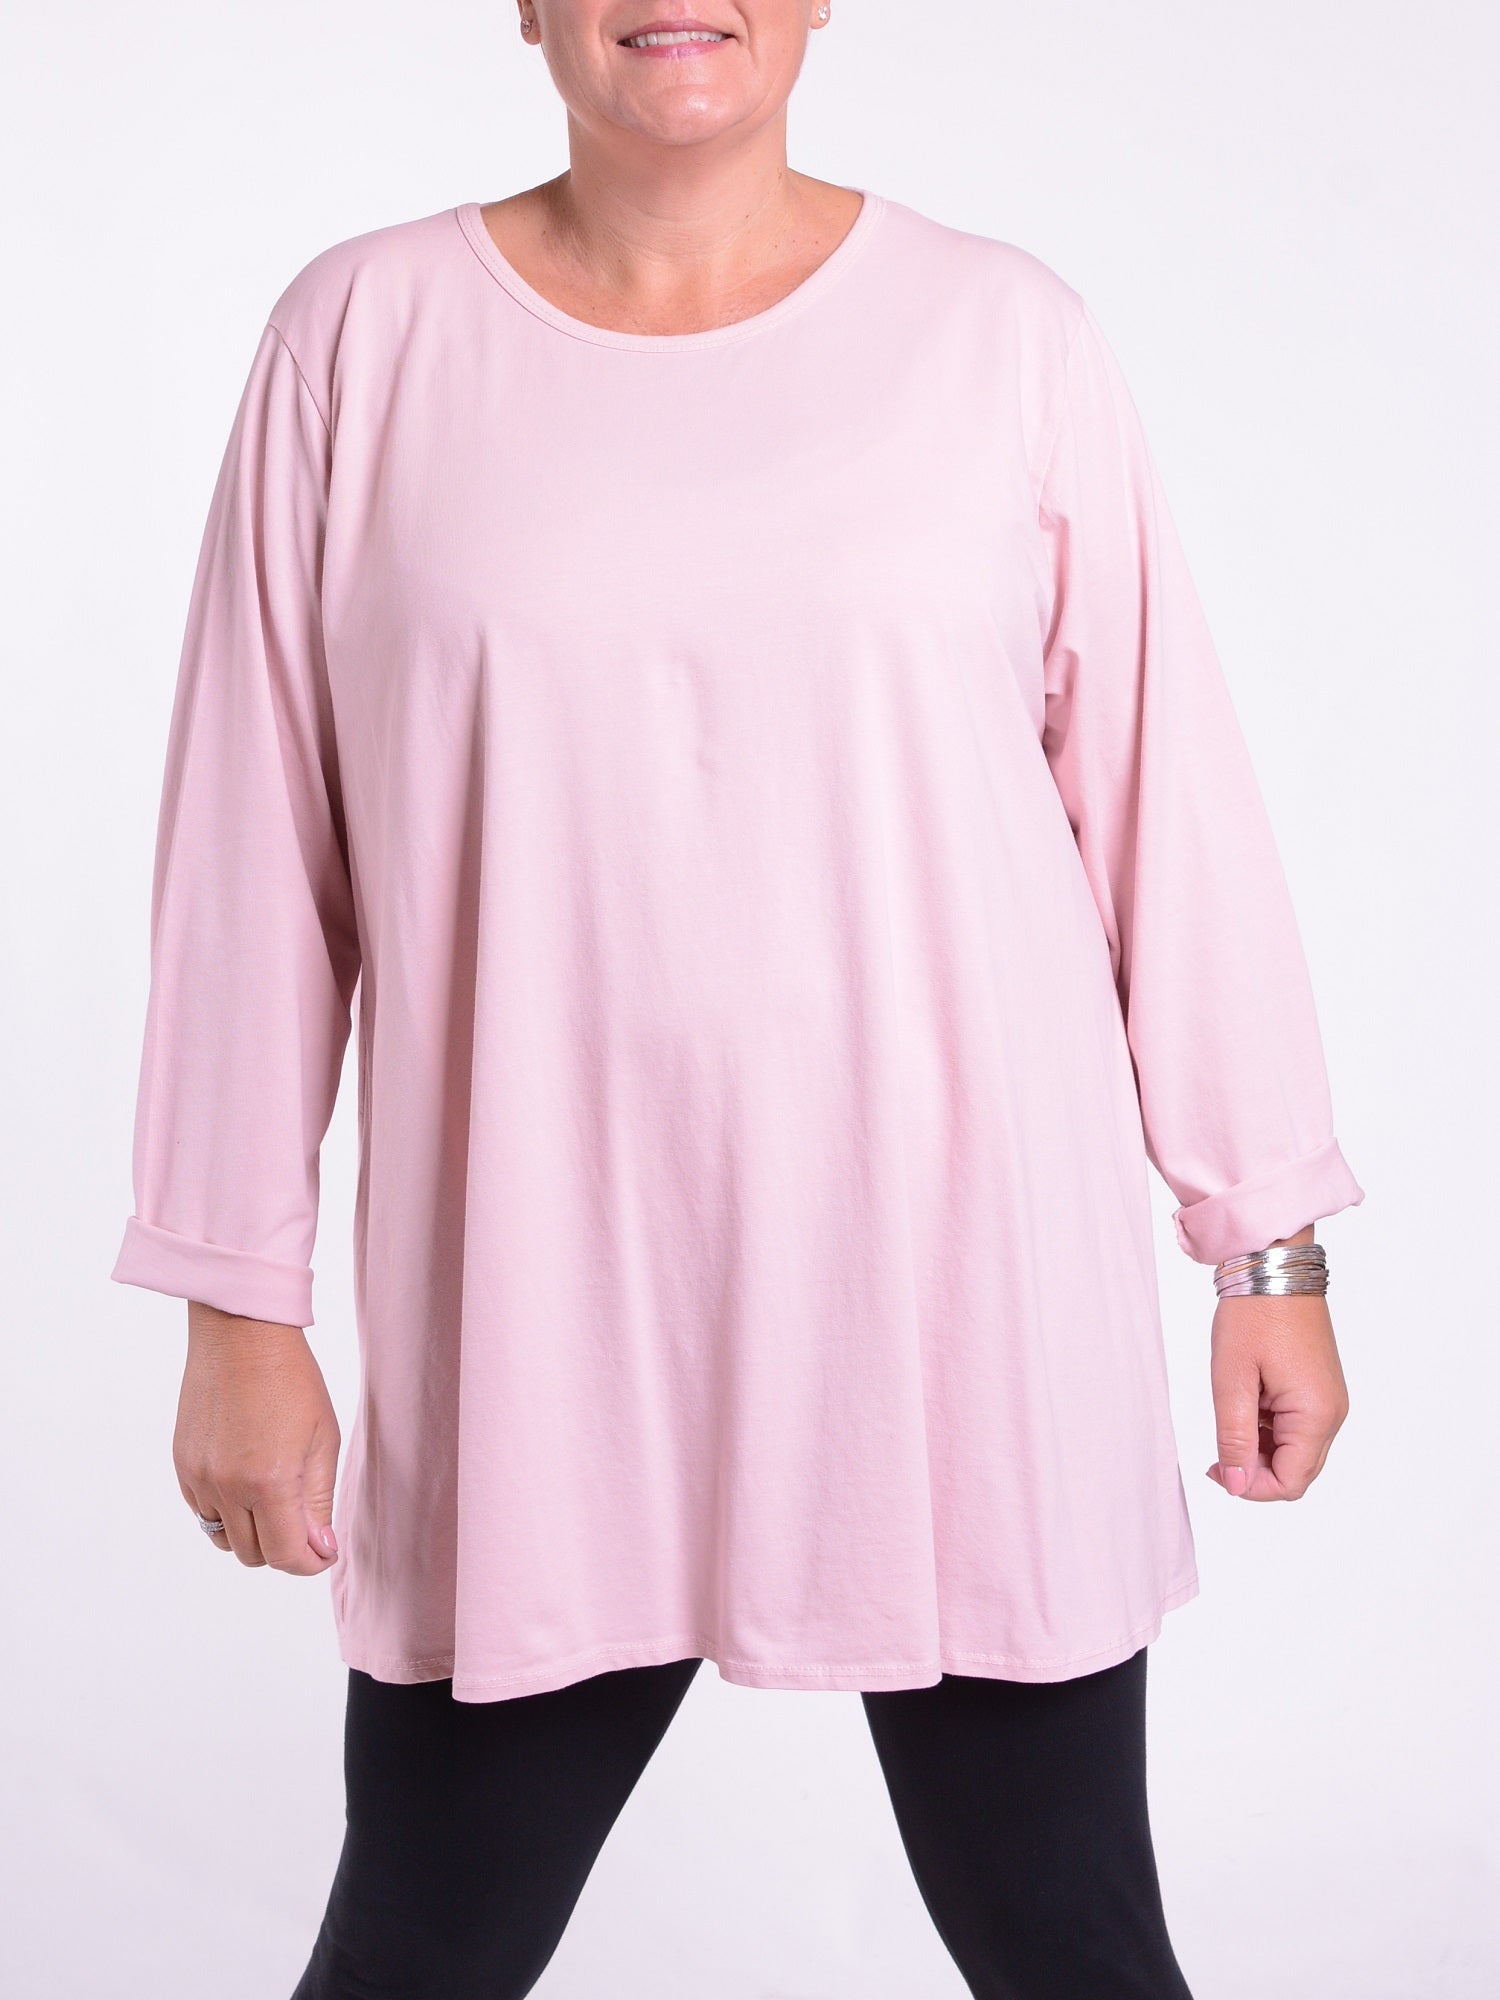 Cotton Swing Top - Round Neck 20516 LONG SLEEVE, Tops & Shirts, Pure Plus Clothing, Lagenlook Clothing, Plus Size Fashion, Over 50 Fashion